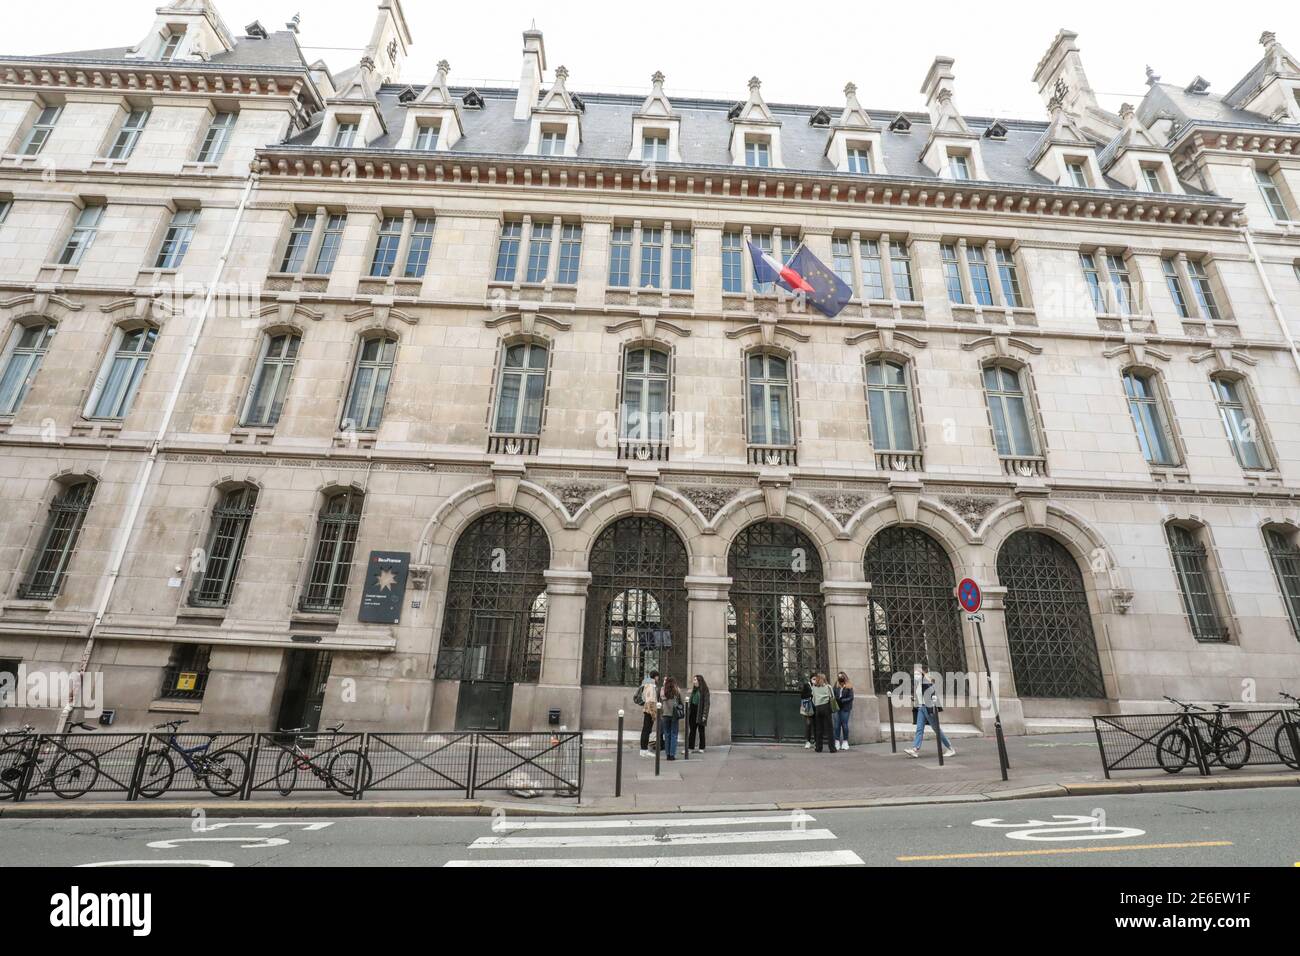 CHAMPAGNE SOCIALISTS LOCATIONS IN PARIS Stock Photo